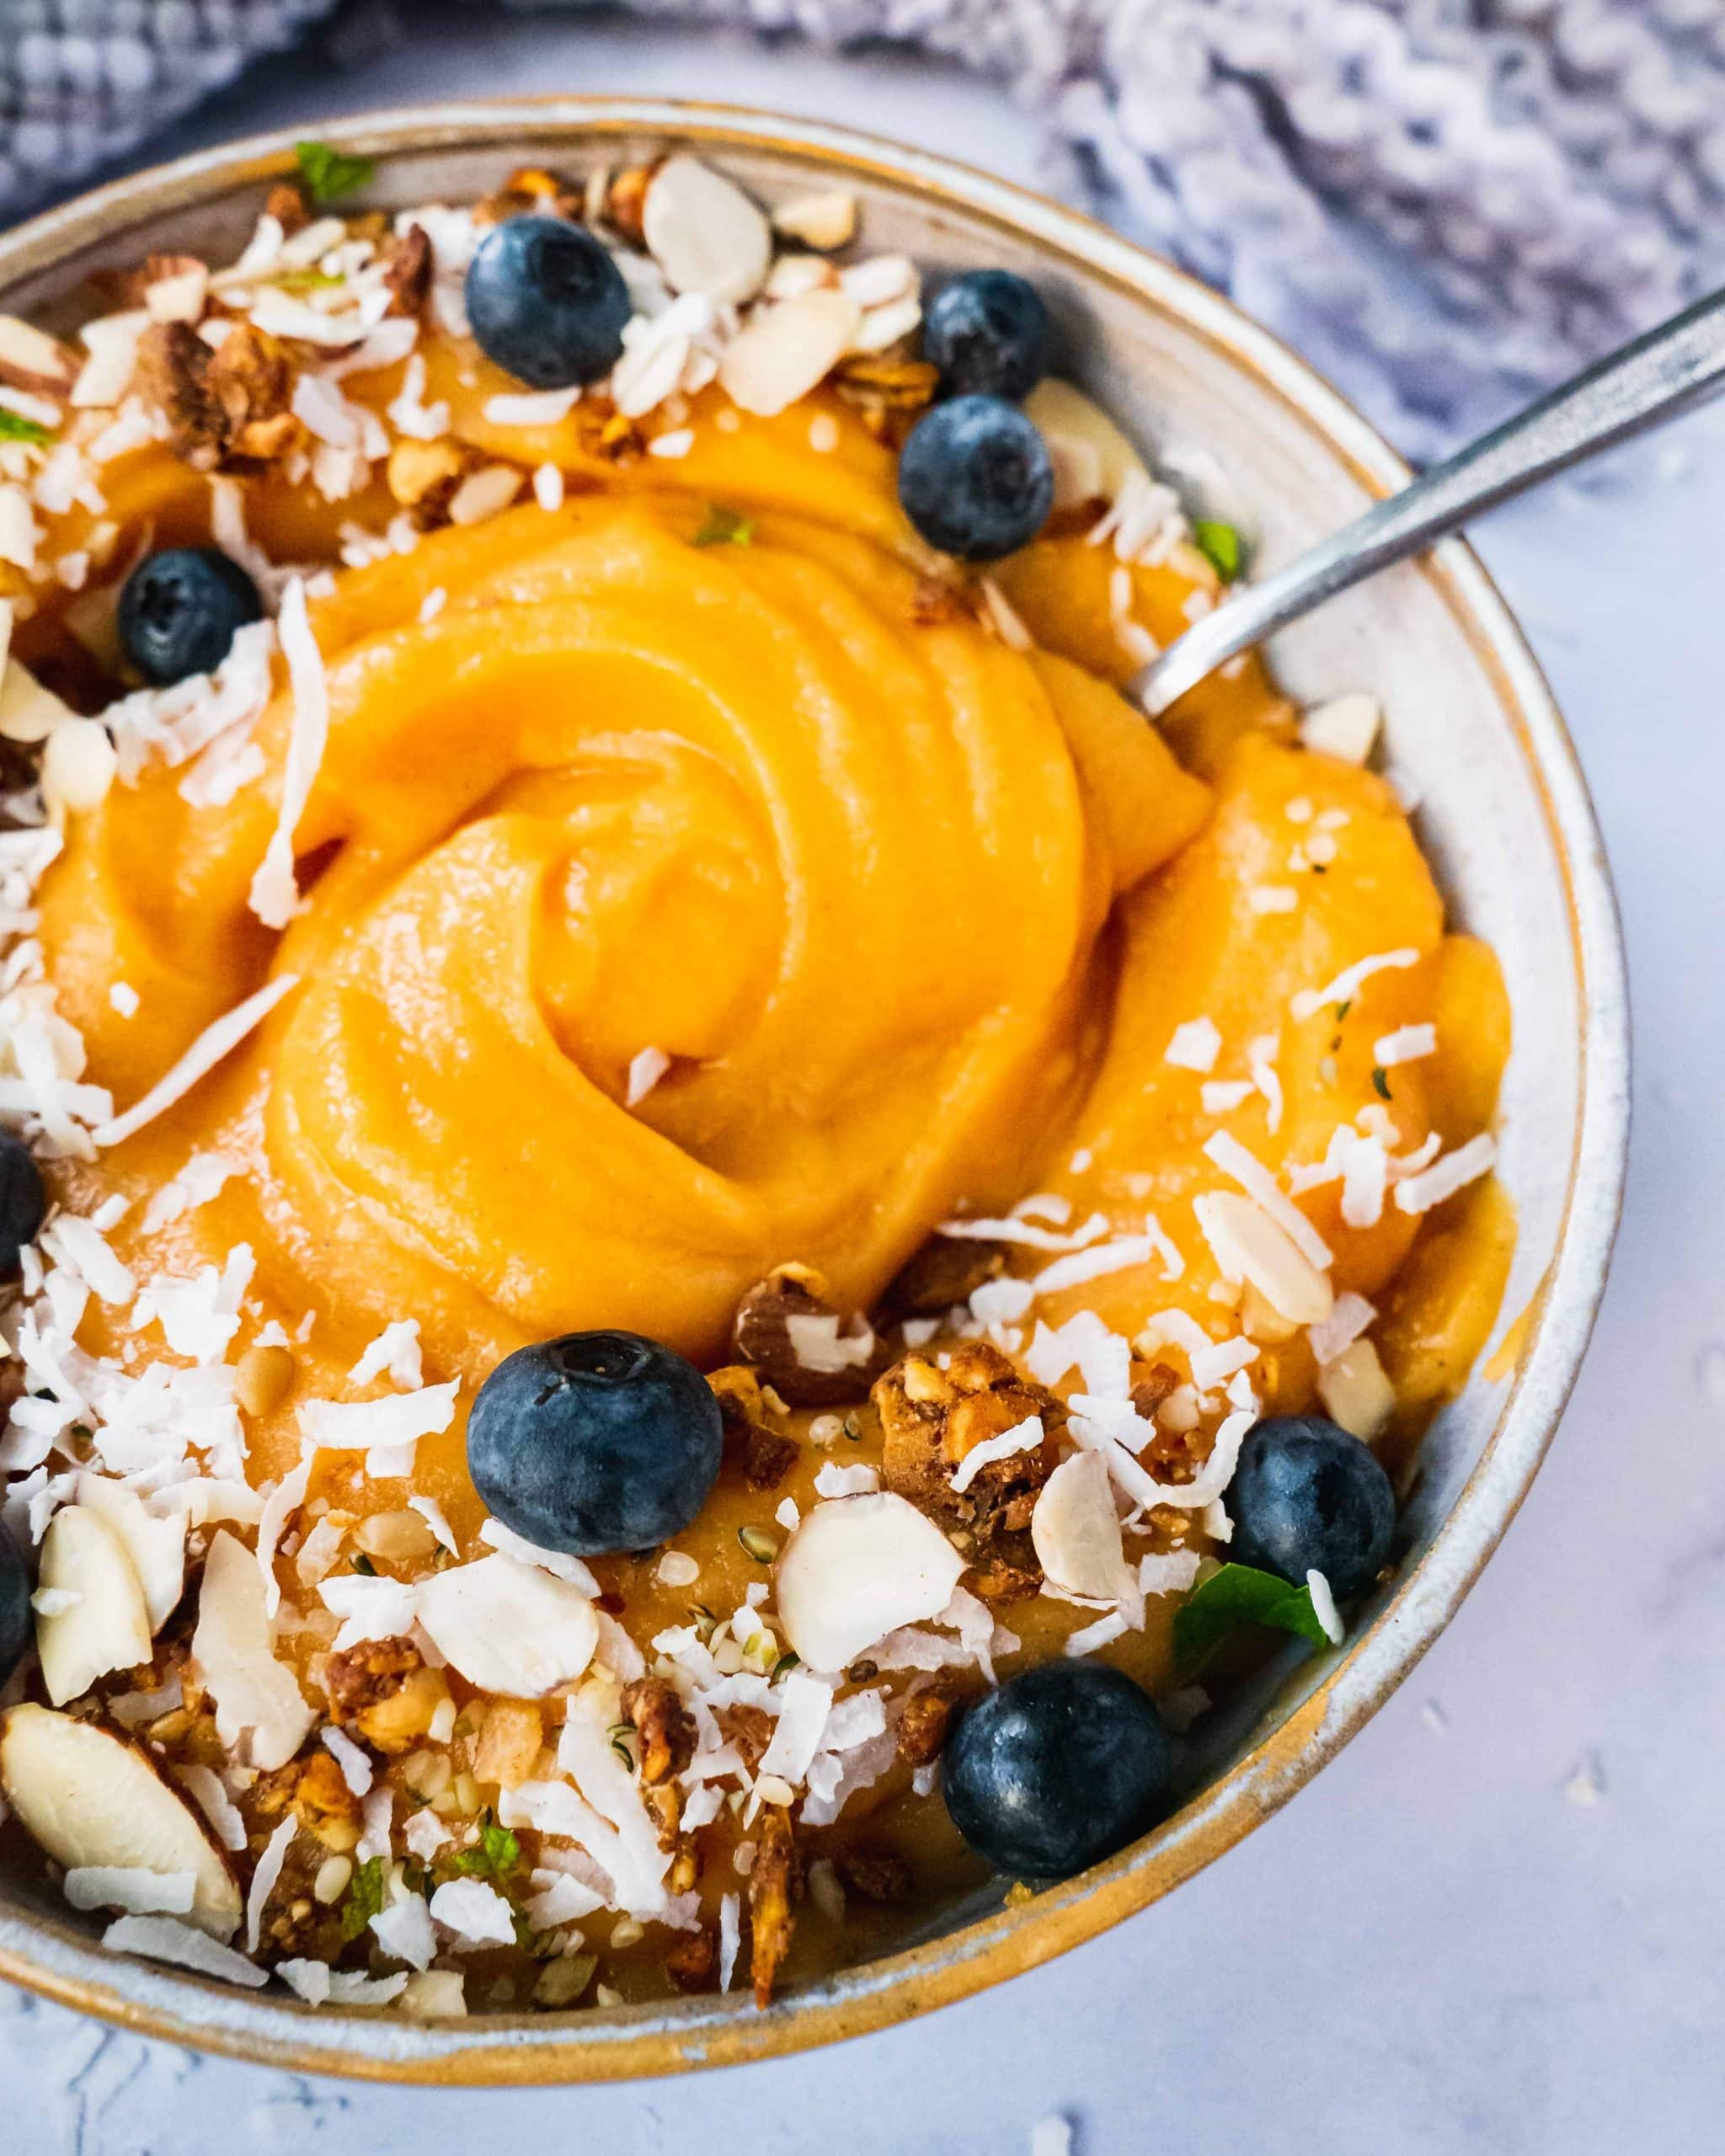 Healthy Tropical Breakfast Smoothie Bowl